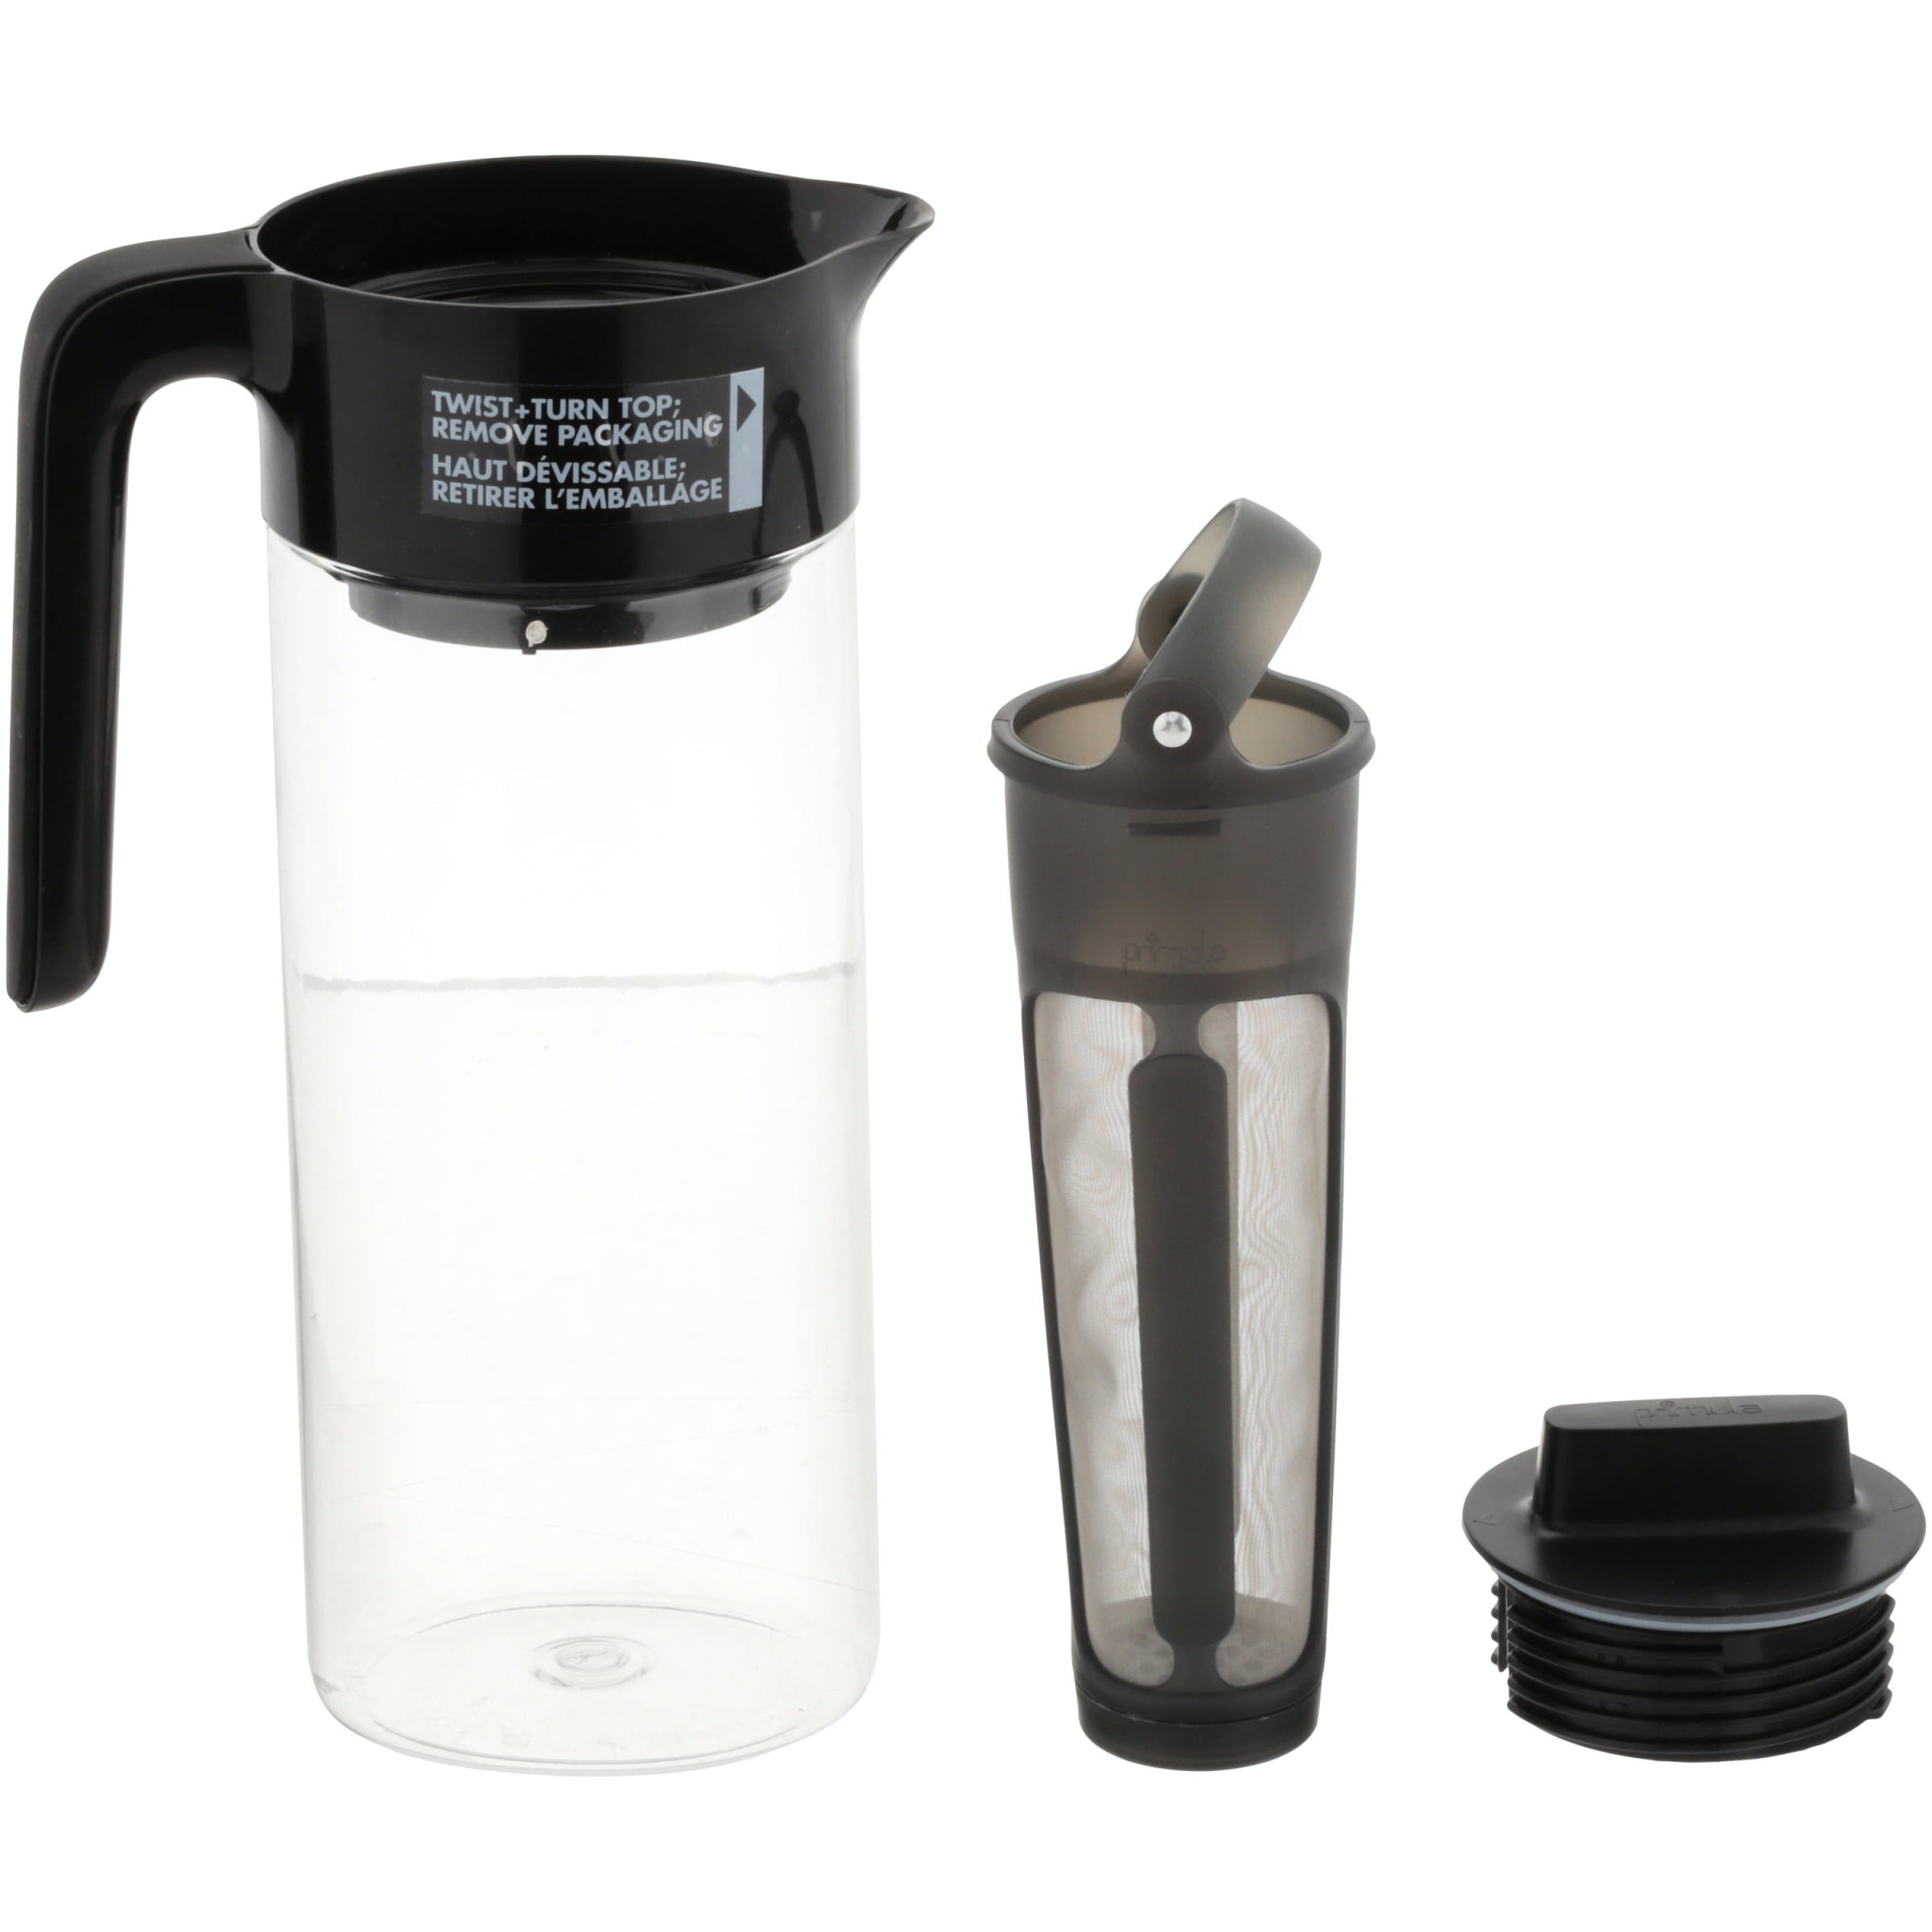 Cold Brew Coffee Maker by Primula - Grounds & Hounds Coffee Co.